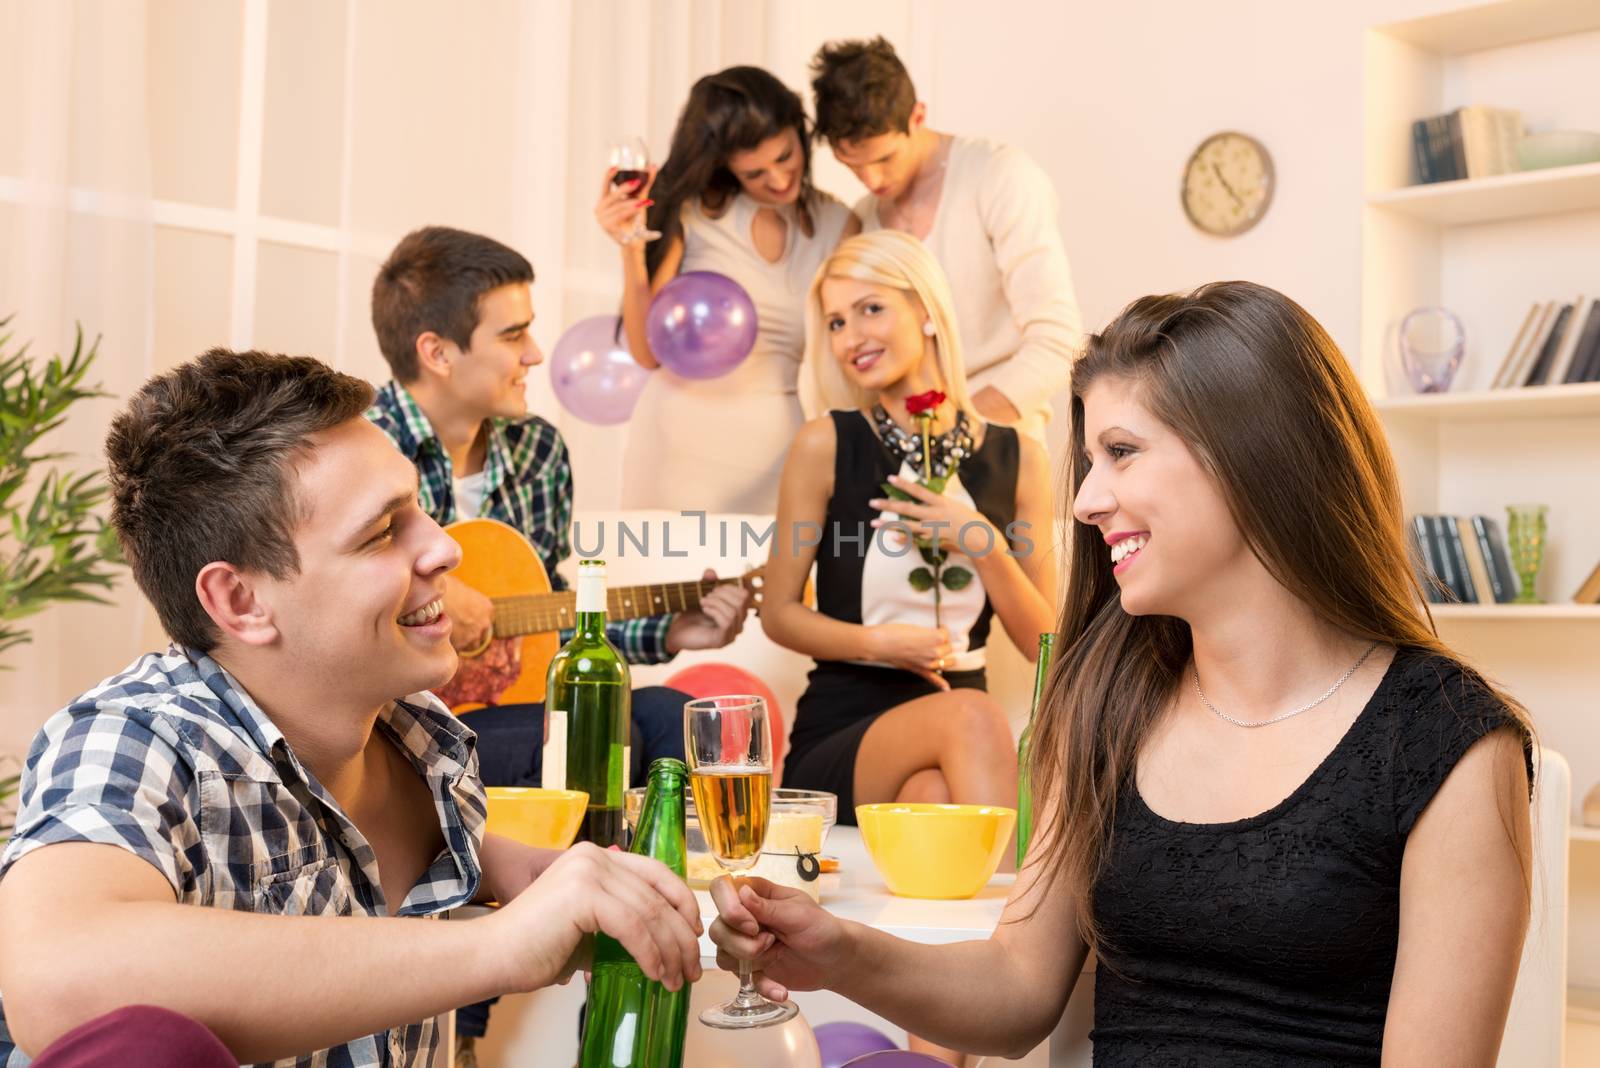 Young couple at a house party, sit on the floor and knocking with drinks, in the background you can see their friends, two couples.